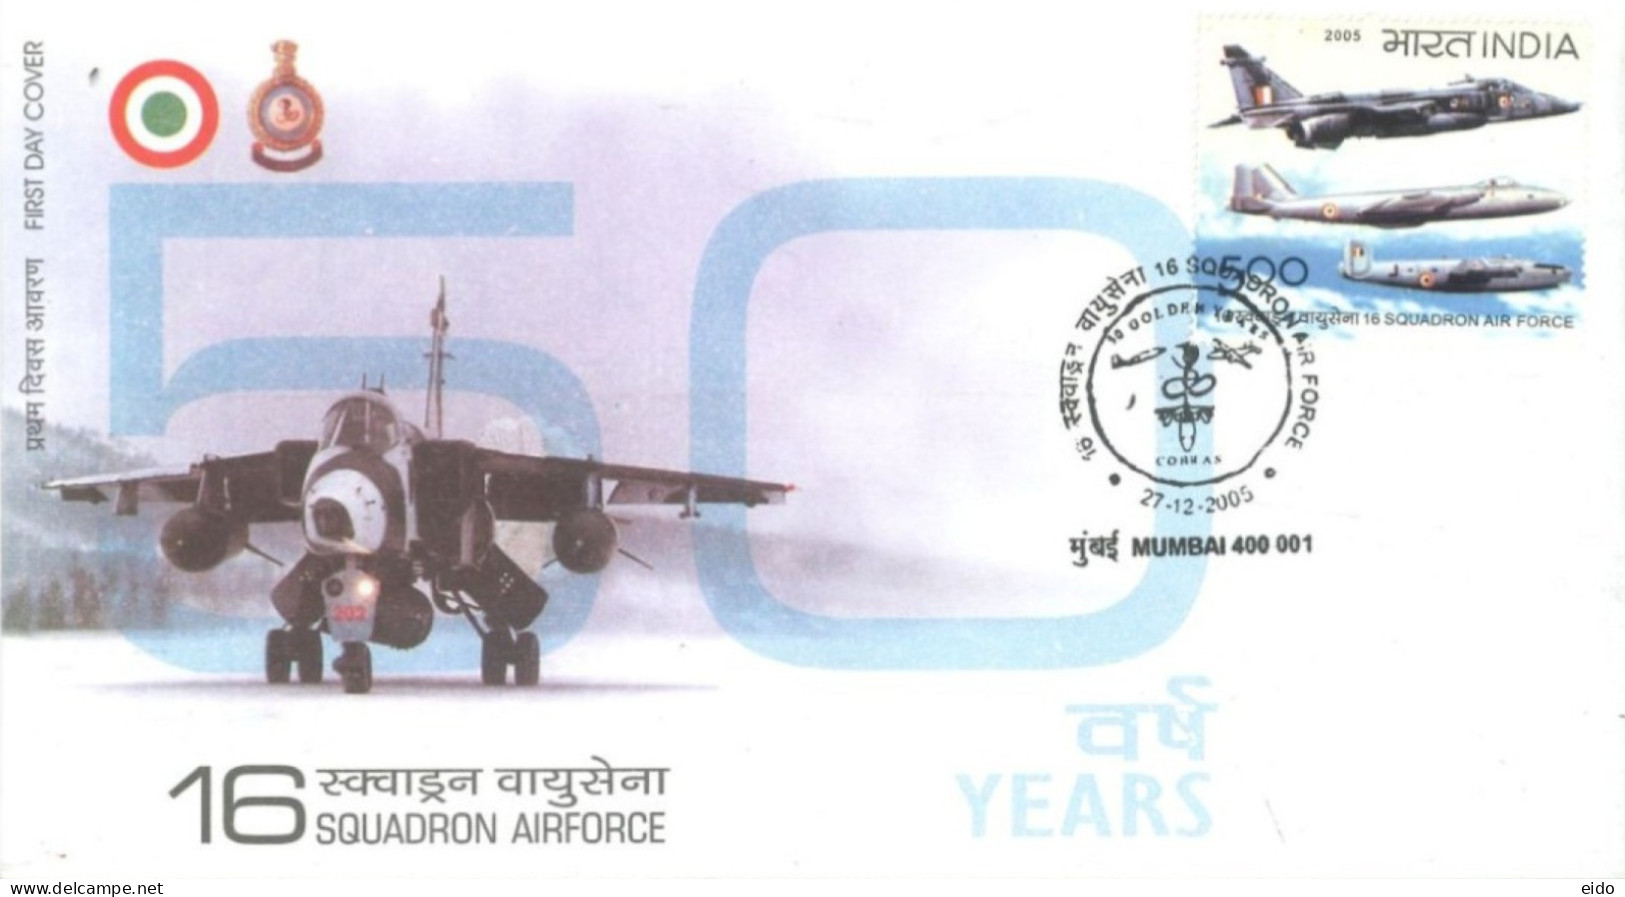 INDIA - 2005 - FDC STAMP OF 16 SQUADRON AIRFORCE. - Covers & Documents